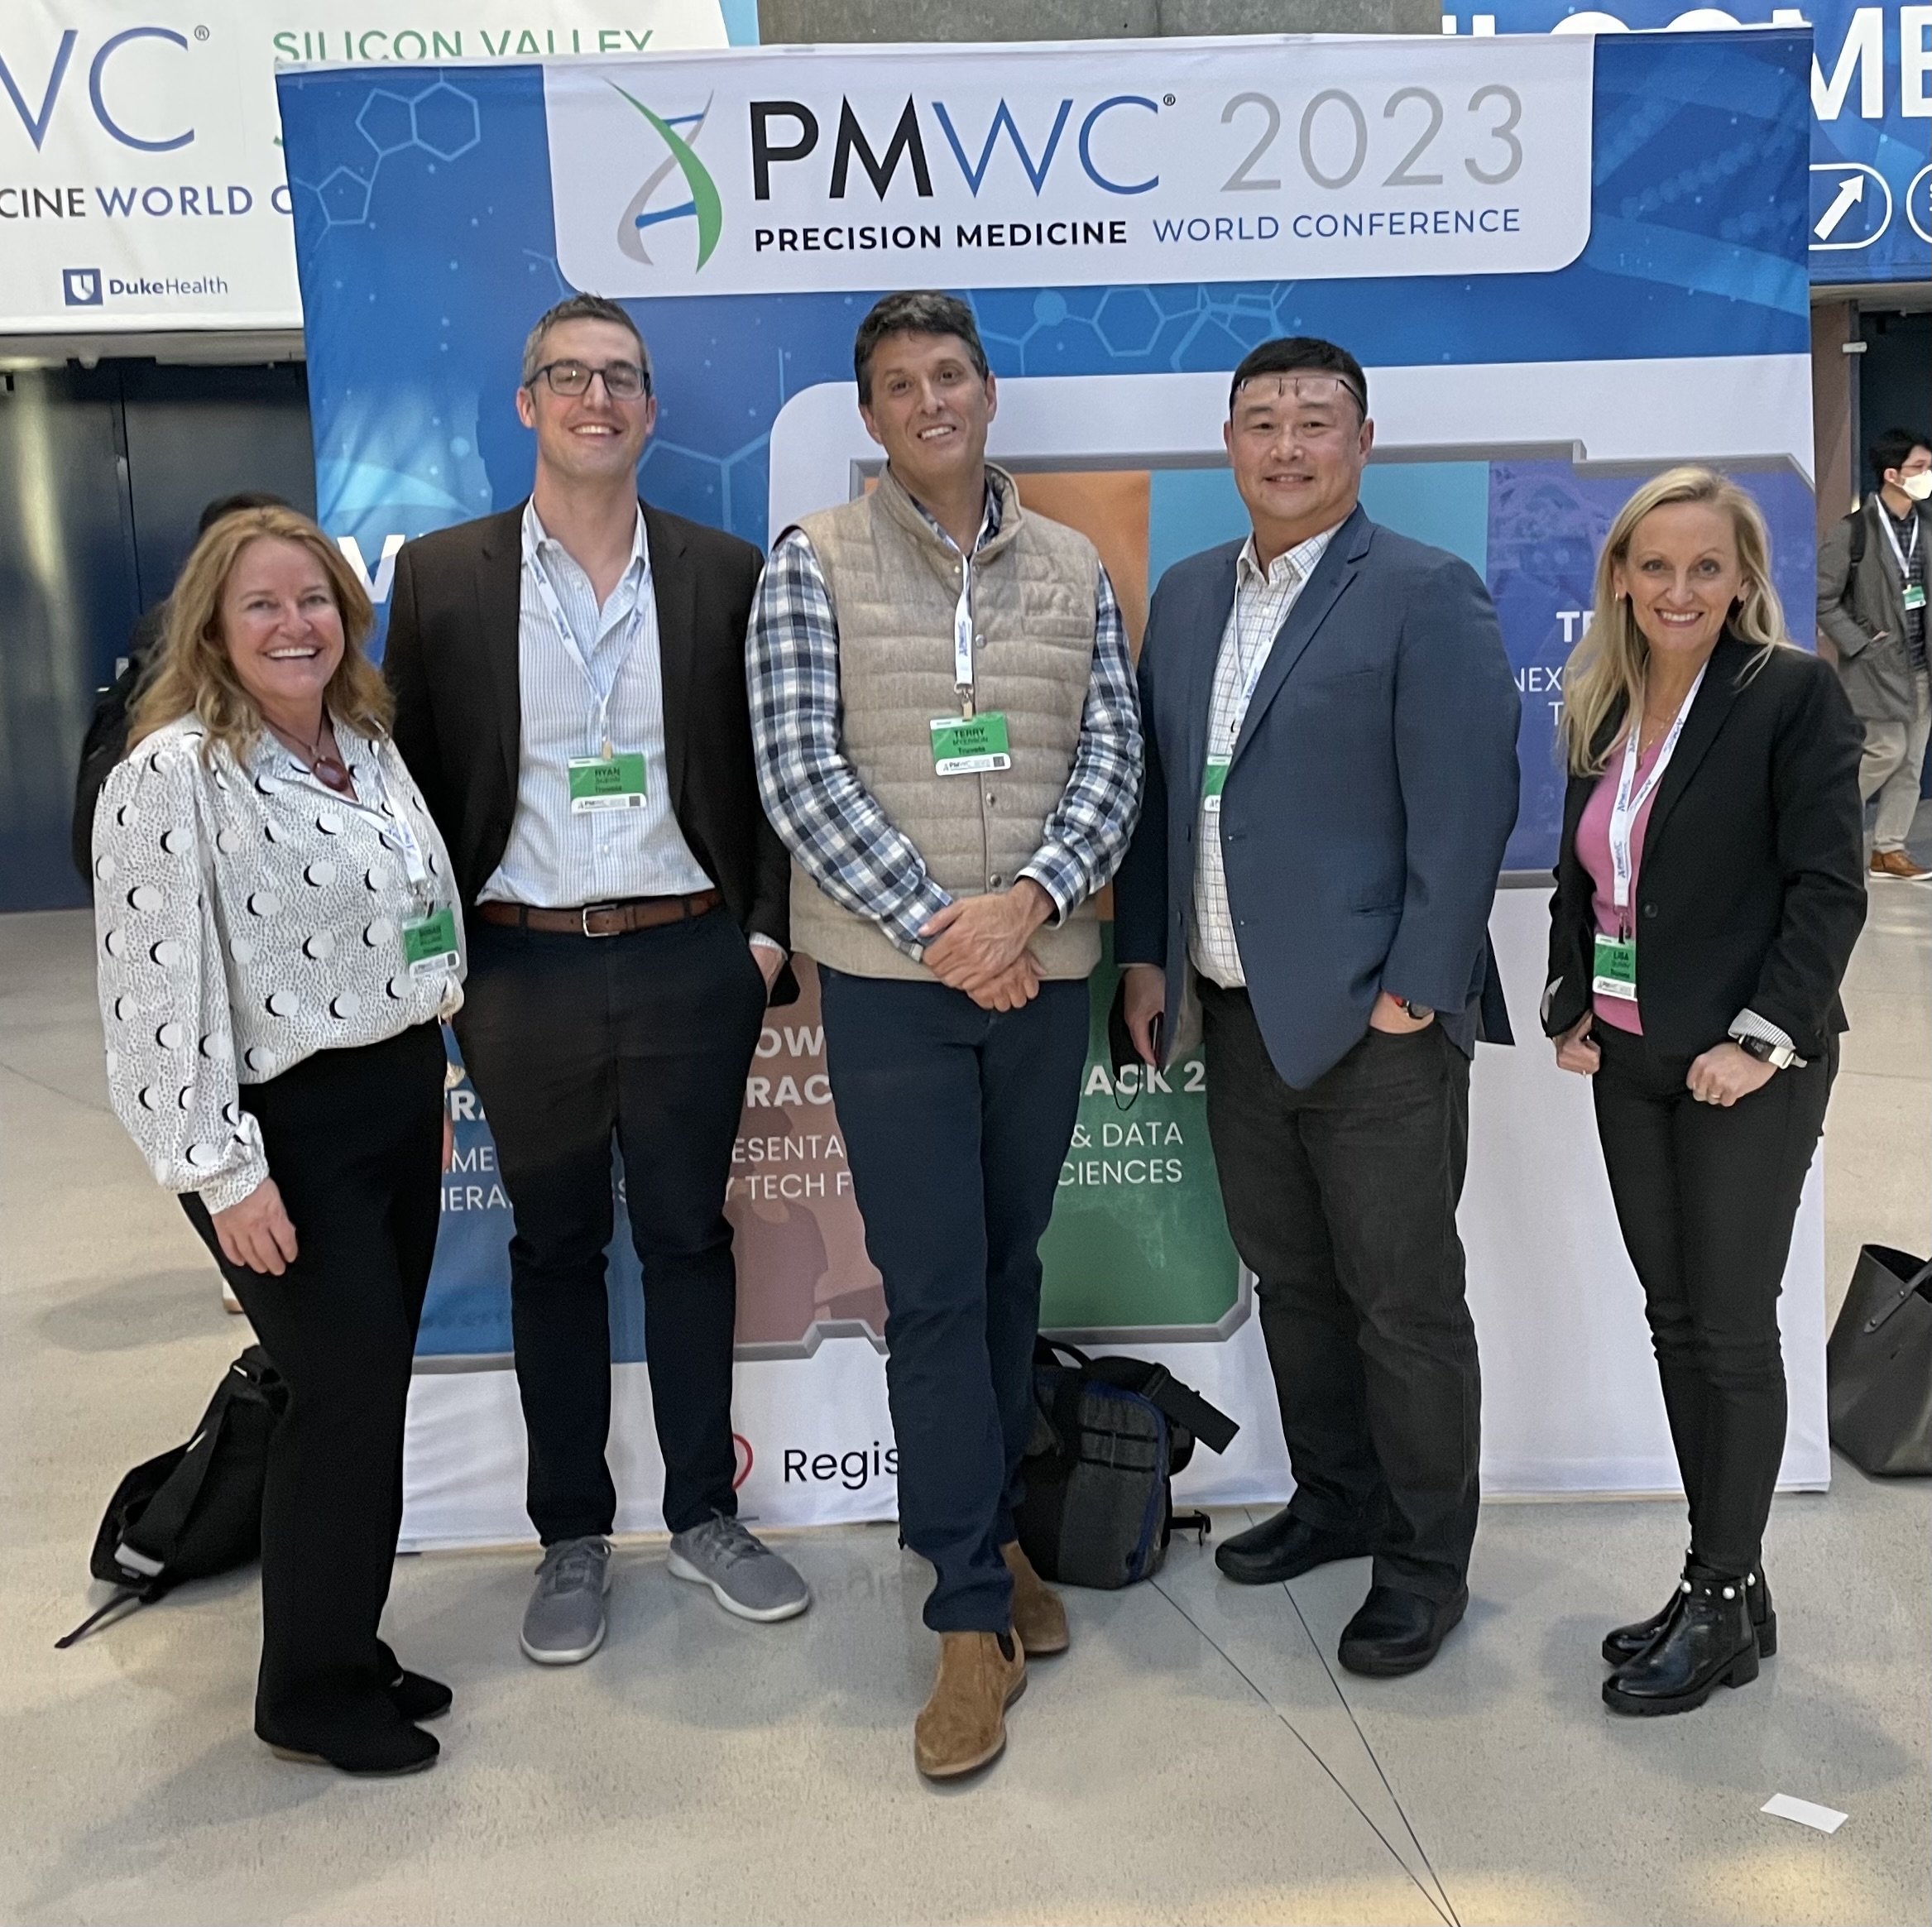 Susan Williams, Dr. Ryan Ahern, Terry Myerson, Dr. Frederick Lee, and Lisa Gurry, in front of the PMWC sign